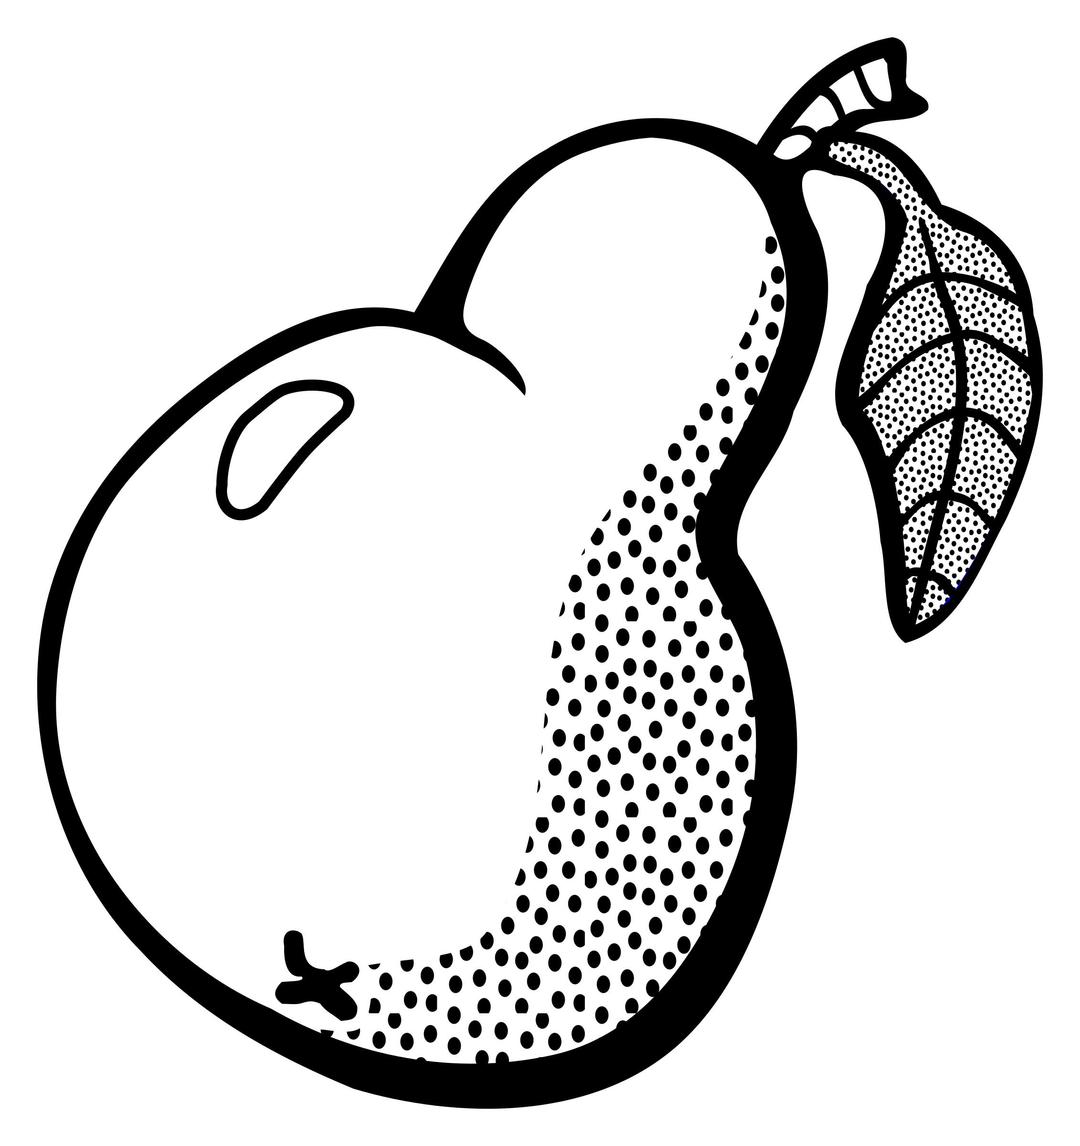 pear - lineart png transparent